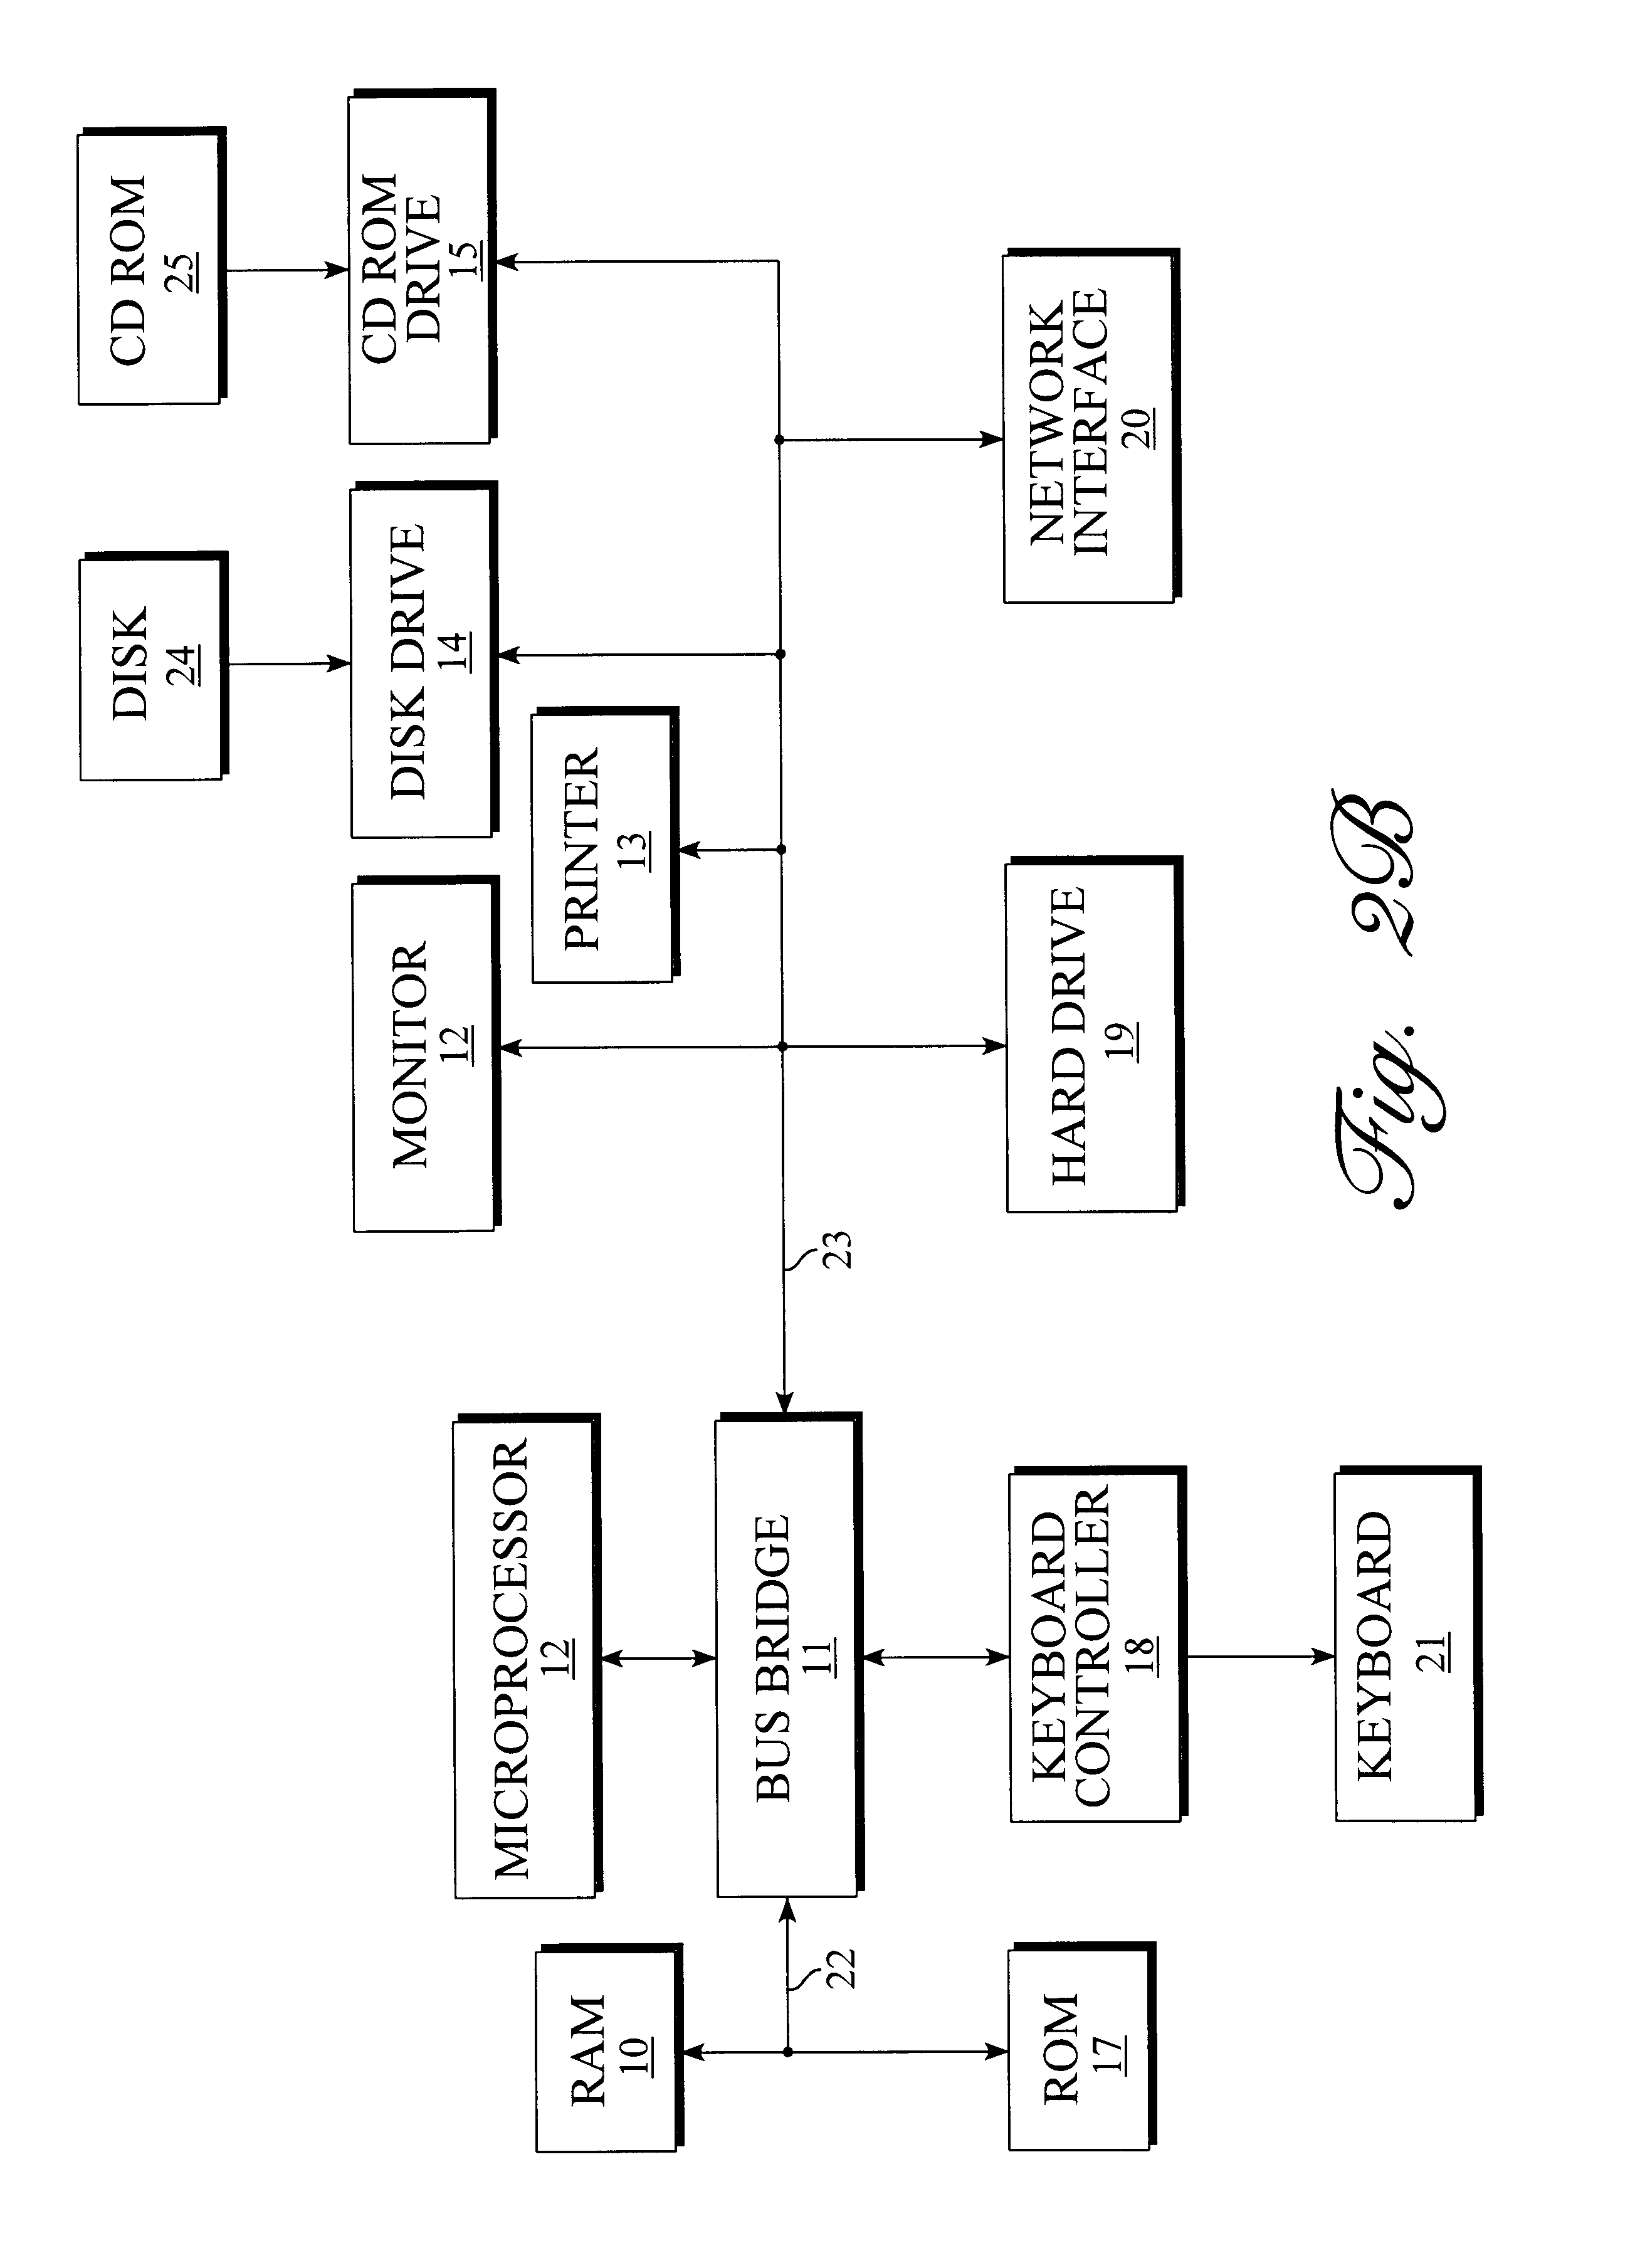 System and method for reducing computational overhead in a sequenced functional verification system